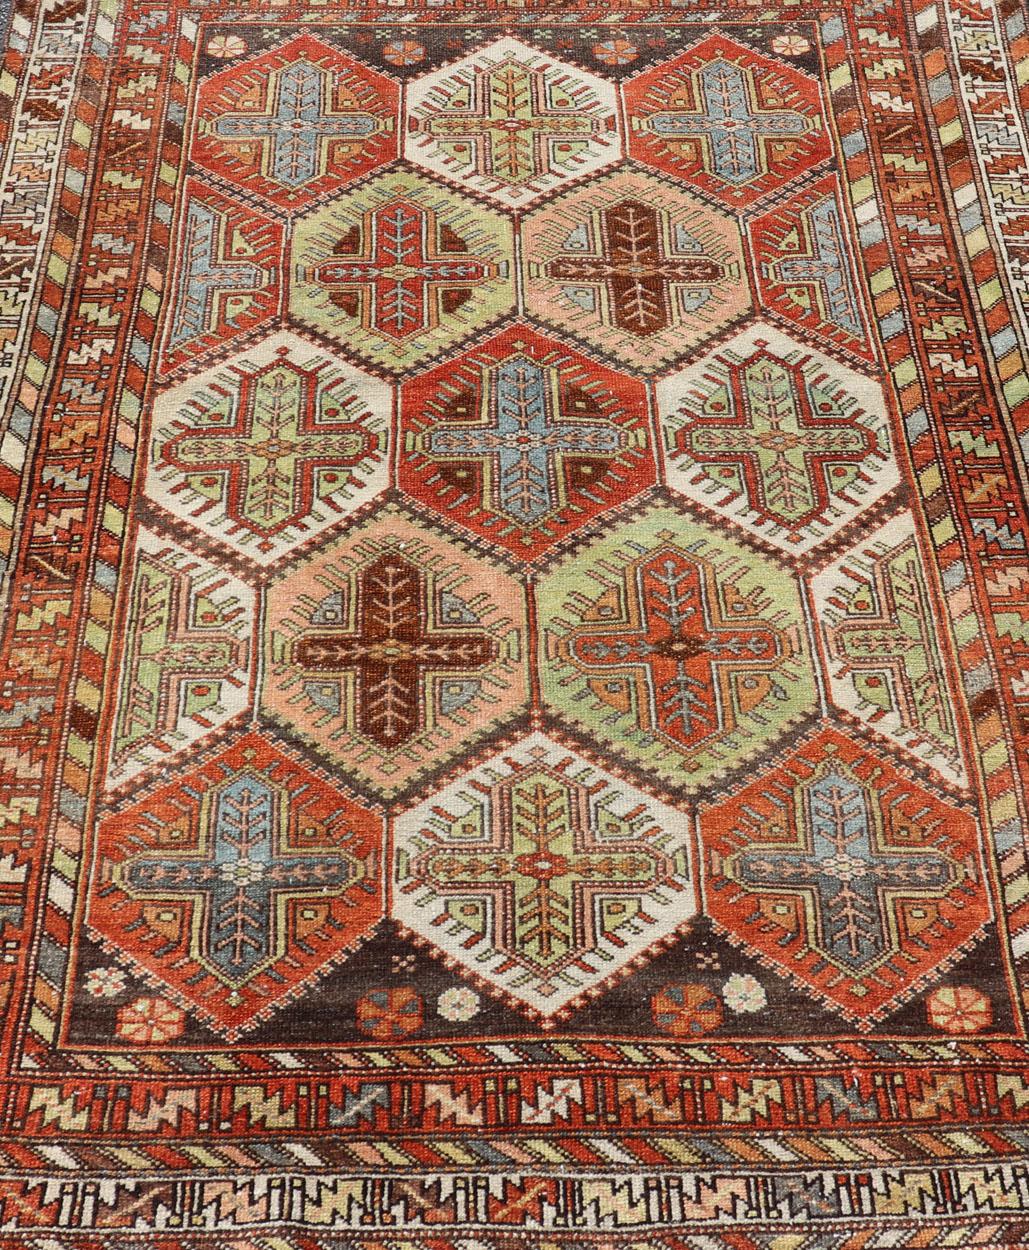 Hand-Knotted Antique Persian Tribal Motif Design with Crosses Bakhtiari Rug in Multi Colors For Sale